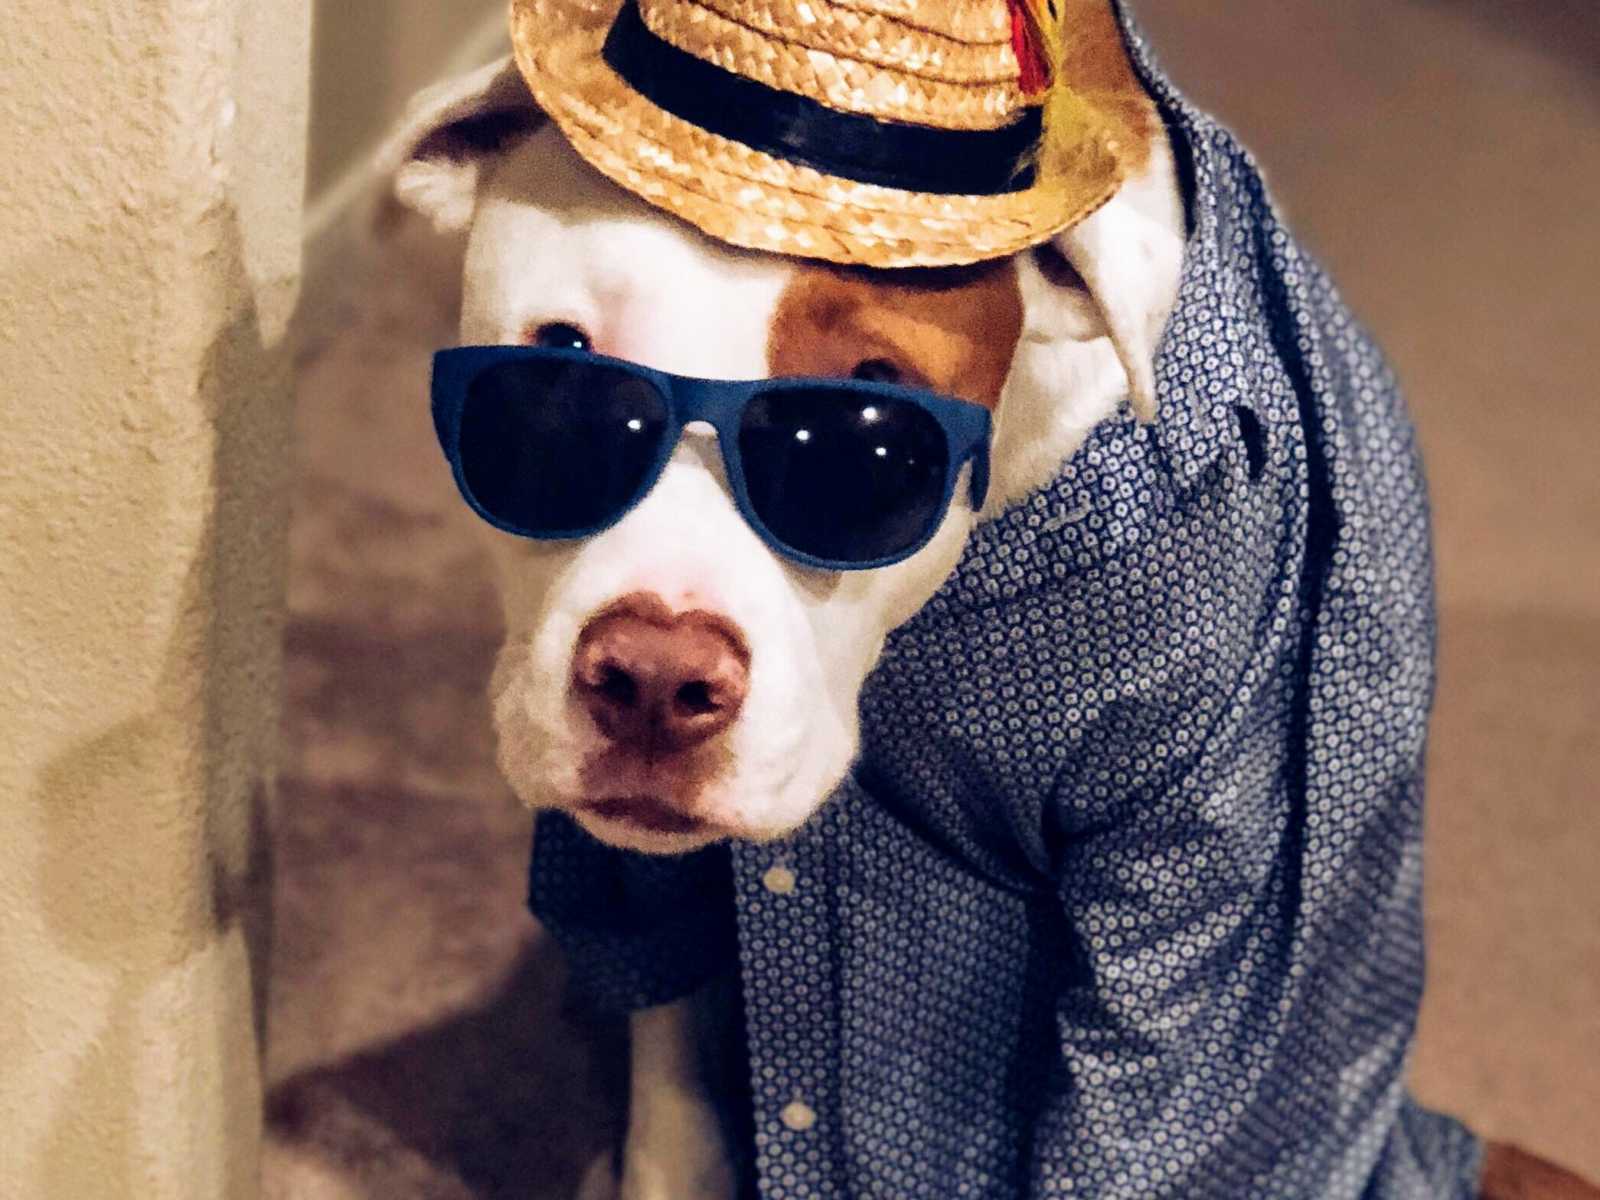 Dog with sunglasses, fedora, and button down shirt sitting down